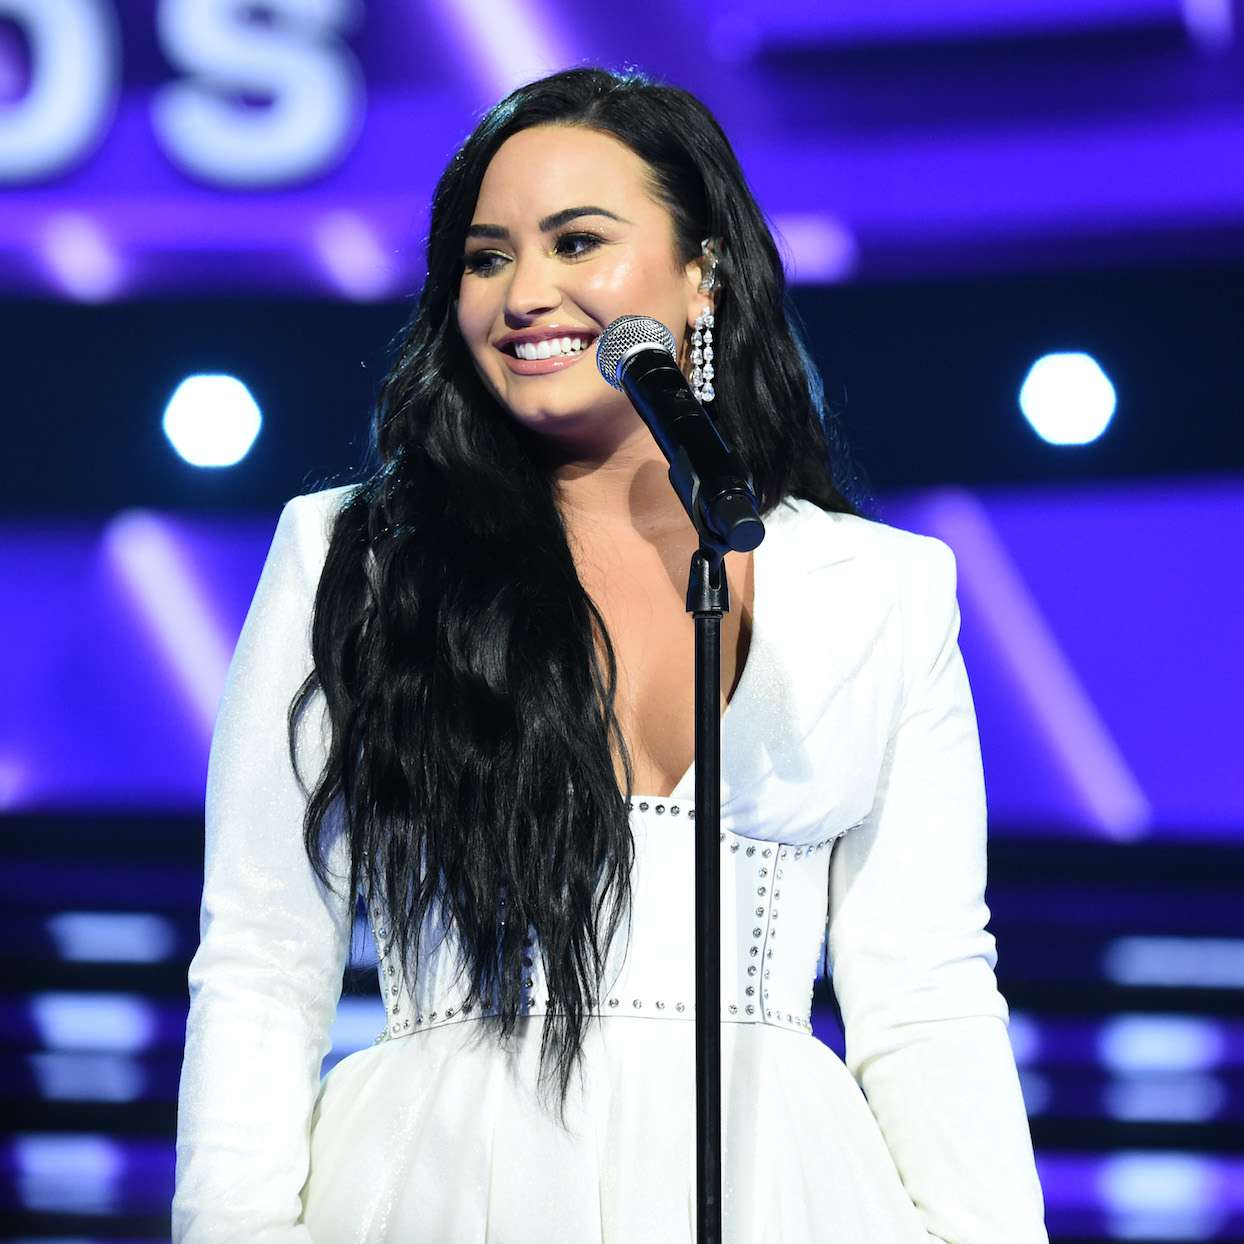 Demi Lovato performs at the 62nd Annual GRAMMY Awards on January 26, 2020 in Los Angeles, California